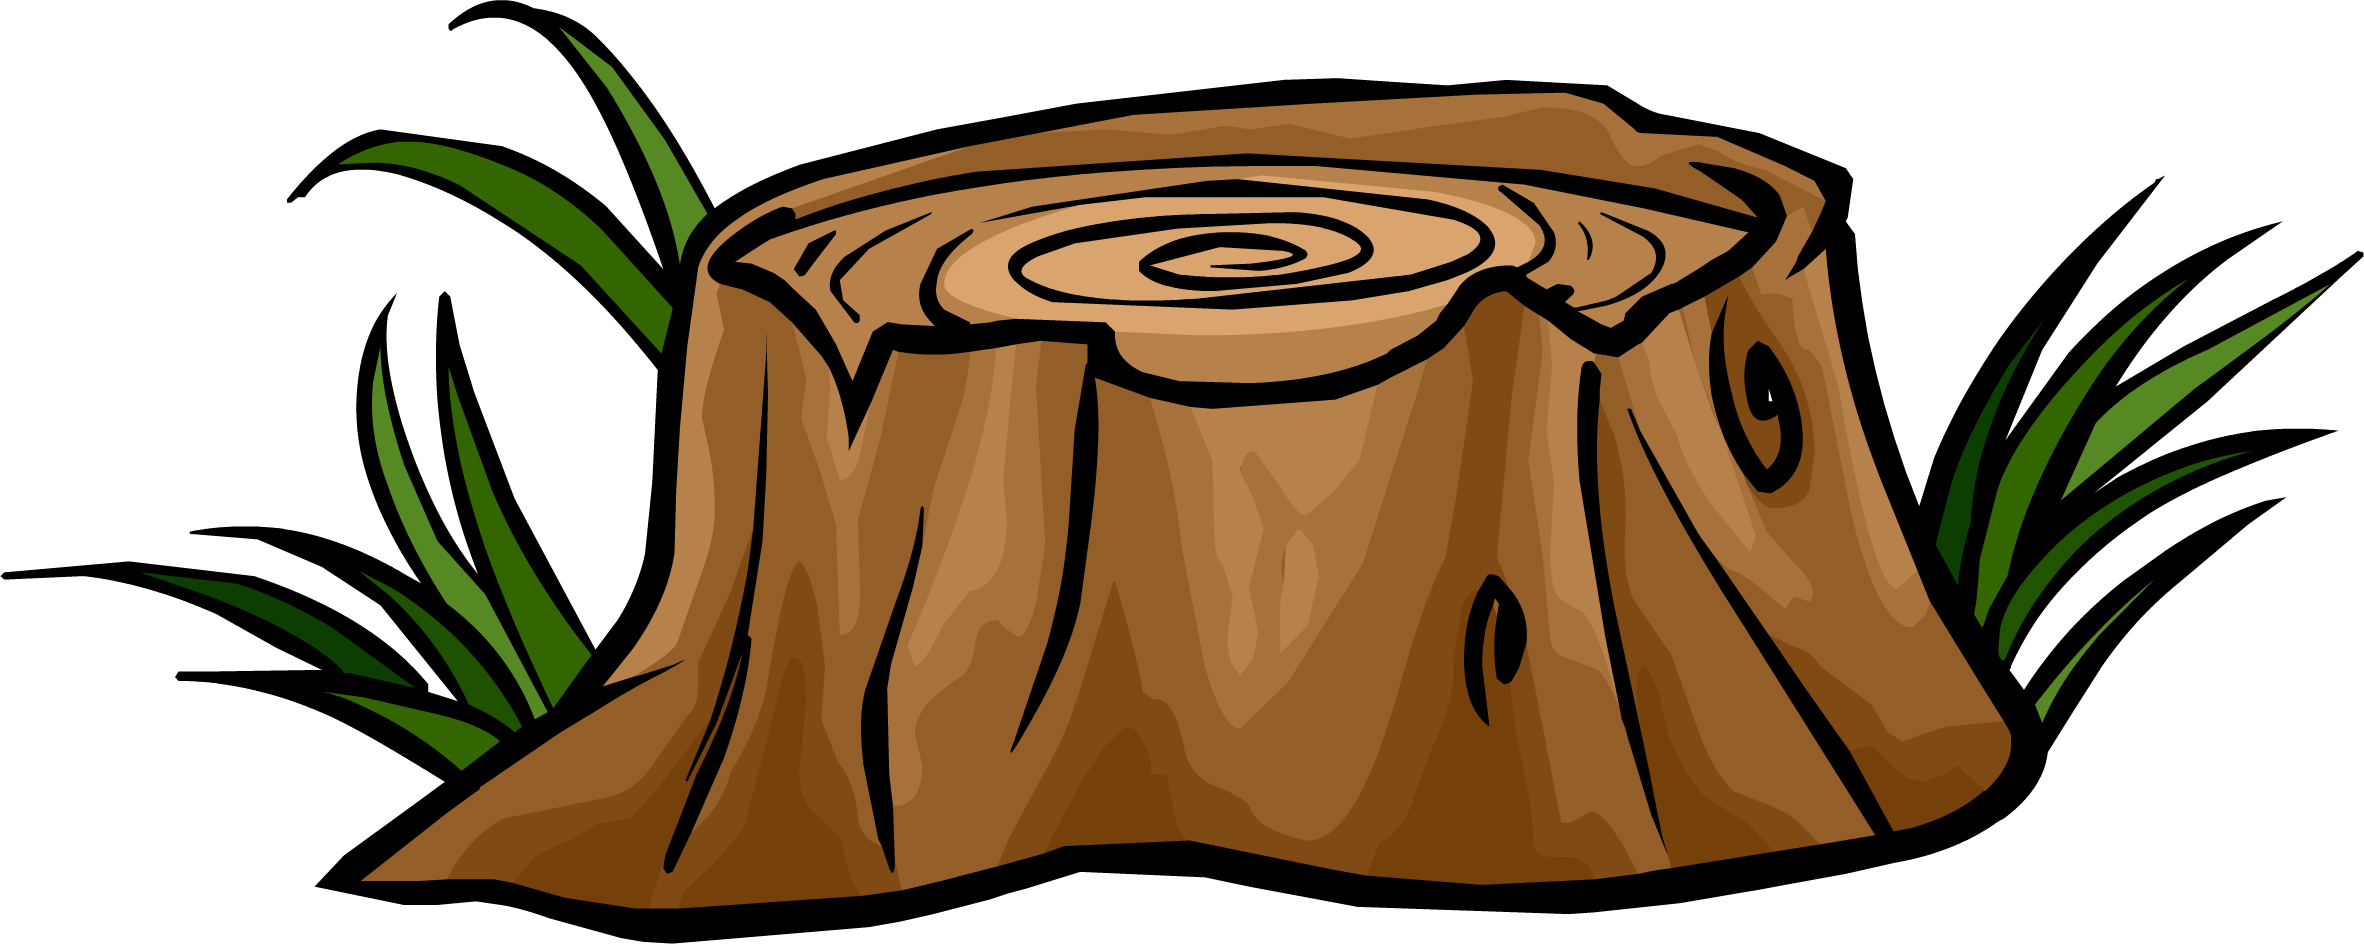 https://static.wikia.nocookie.net/club-penguin-rewritten/images/7/77/Tree_Stump.png/revision/latest?cb=20181023222428